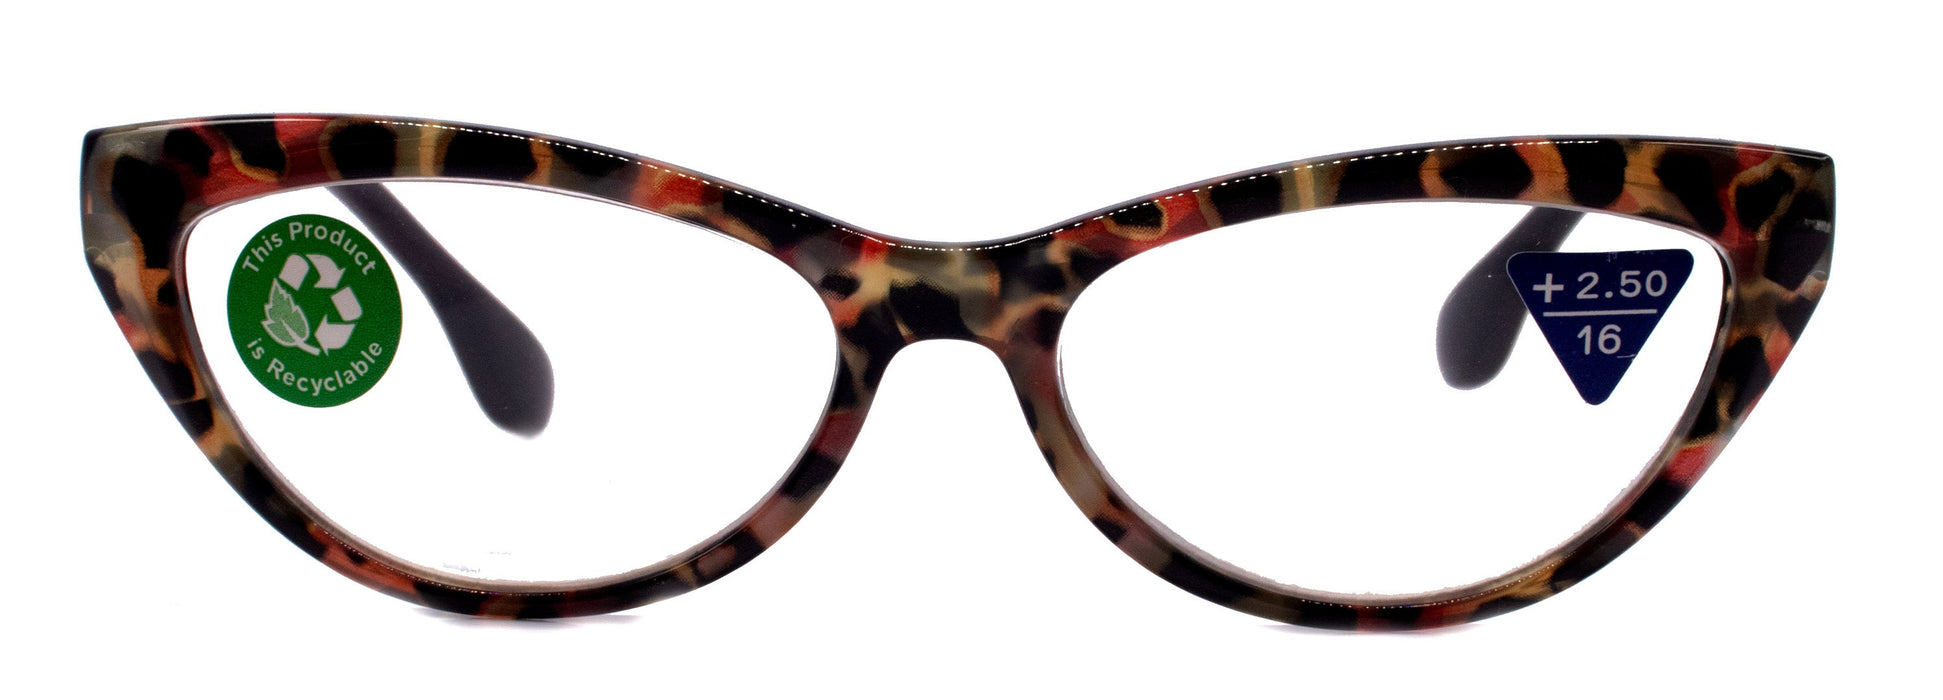 Lynx, (Premium) Reading Glass, High End Readers +1.25..+3 Magnifying, Cat Eye optical Frame, Tortoise Shell (Brown, Red) NY Fifth Avenue.